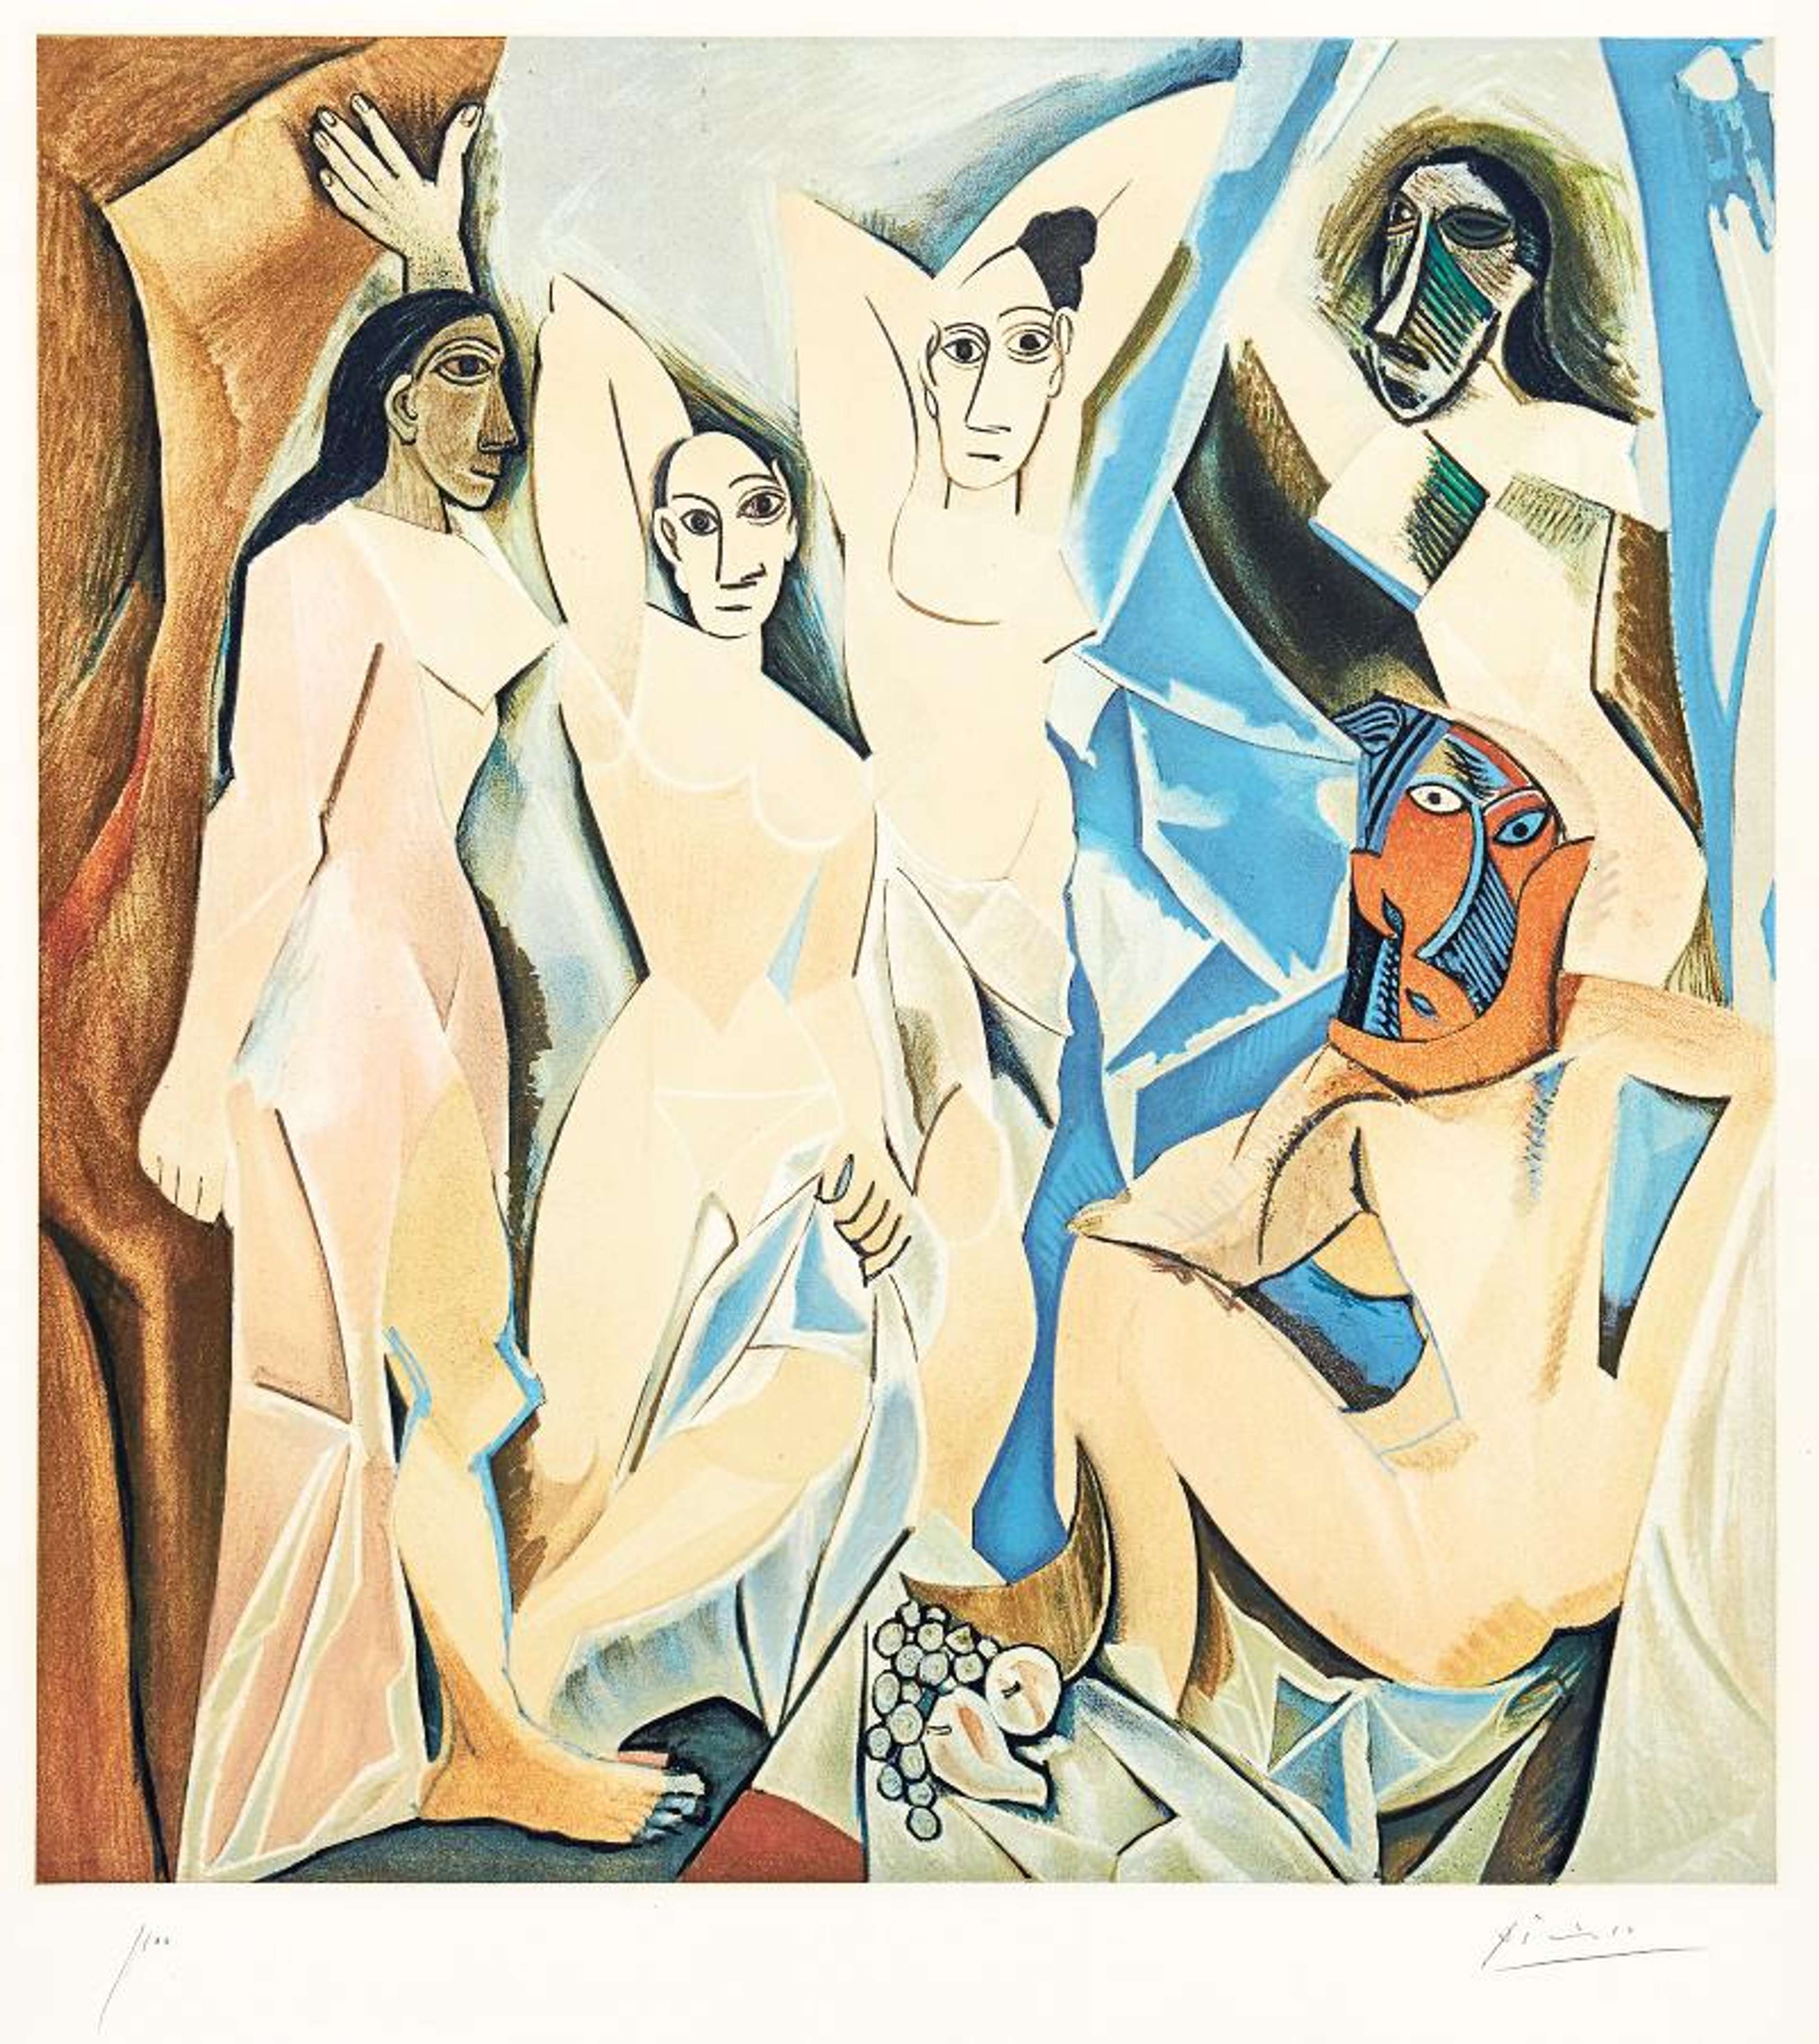 Pablo Picasso’s Les Demoiselles d'Avignon. A Cubist composition of five women painted in hues of pink facing the viewer with backgrounds of muted red and blue.